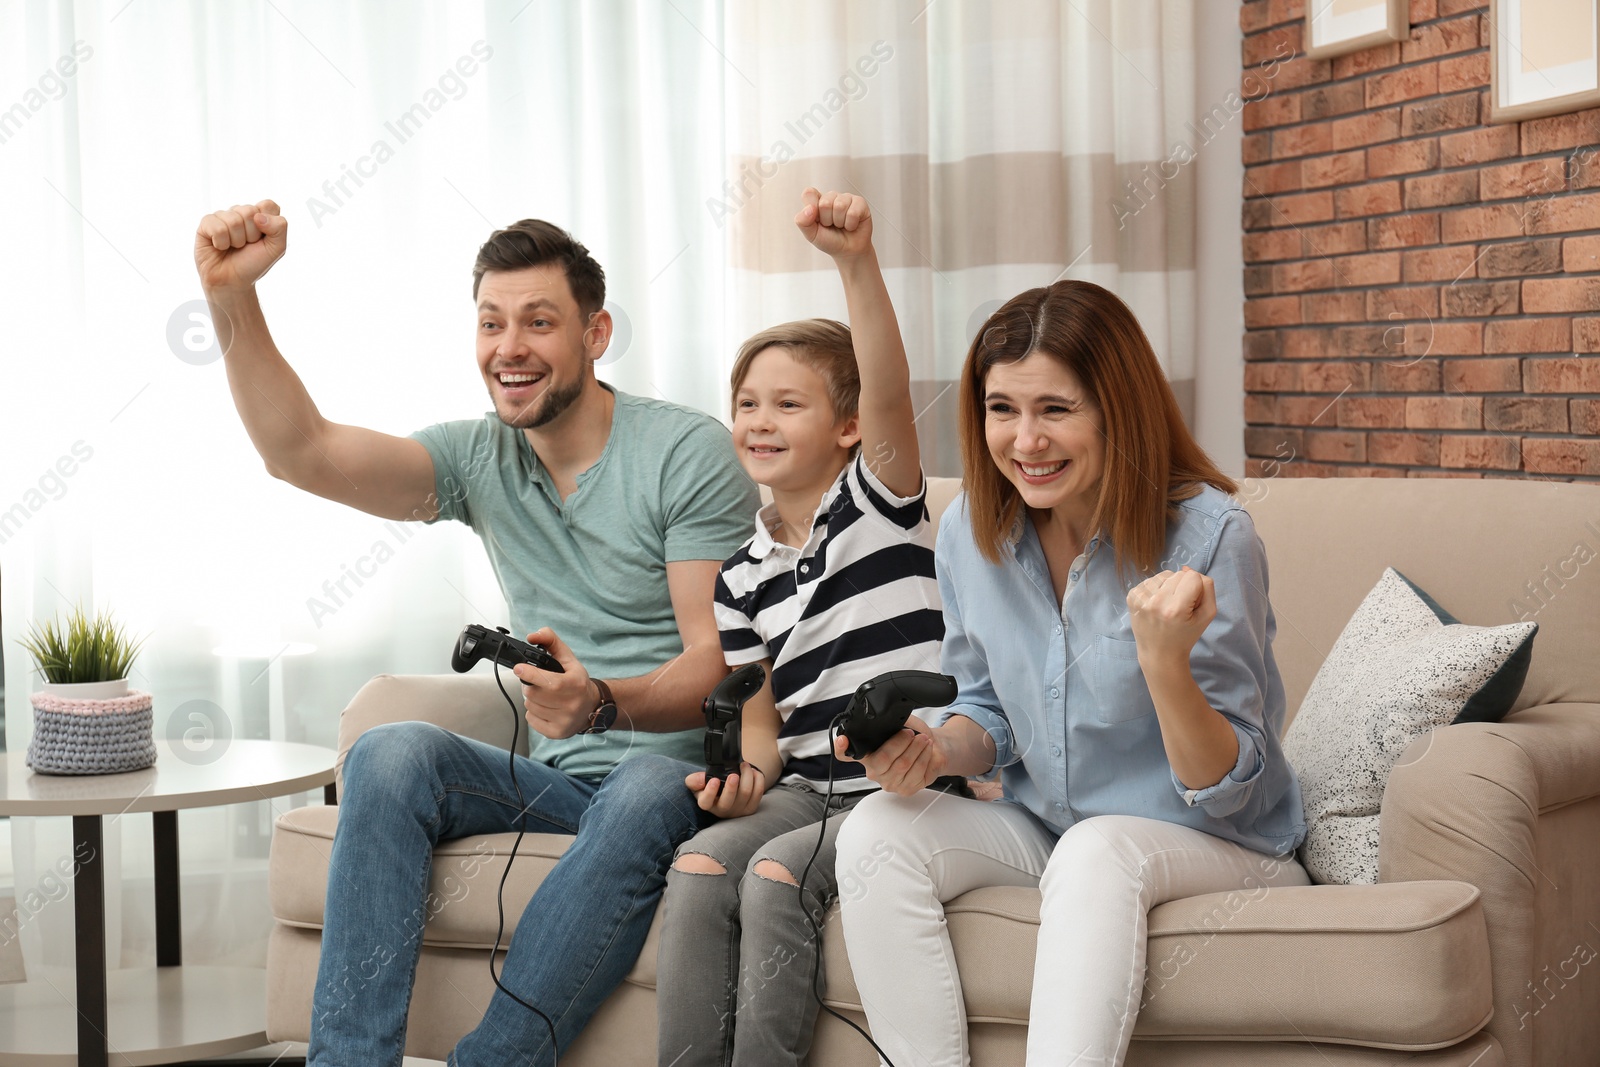 Photo of Happy family playing video games on sofa in living room